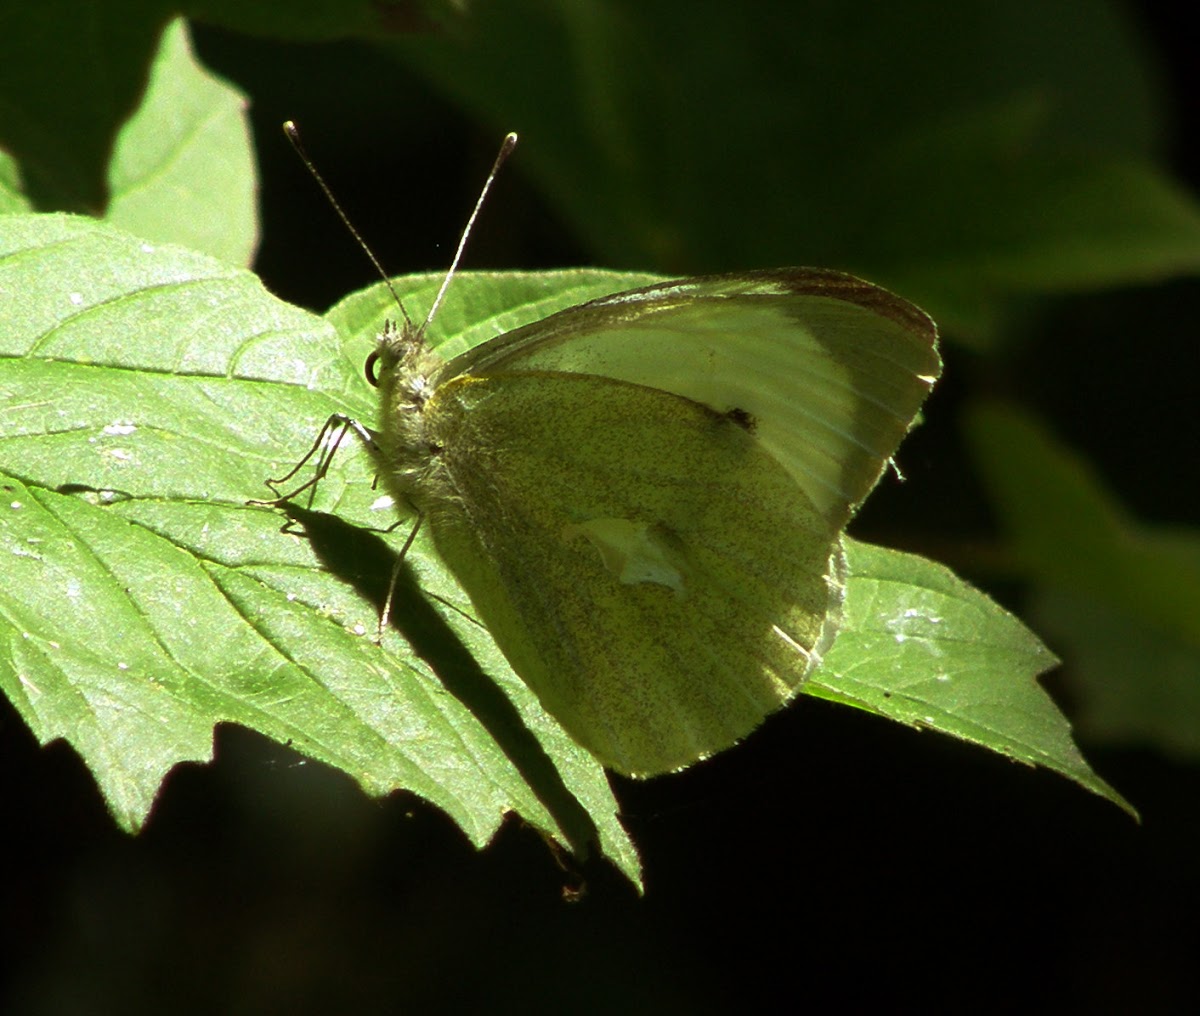 Cabbage Butterfly